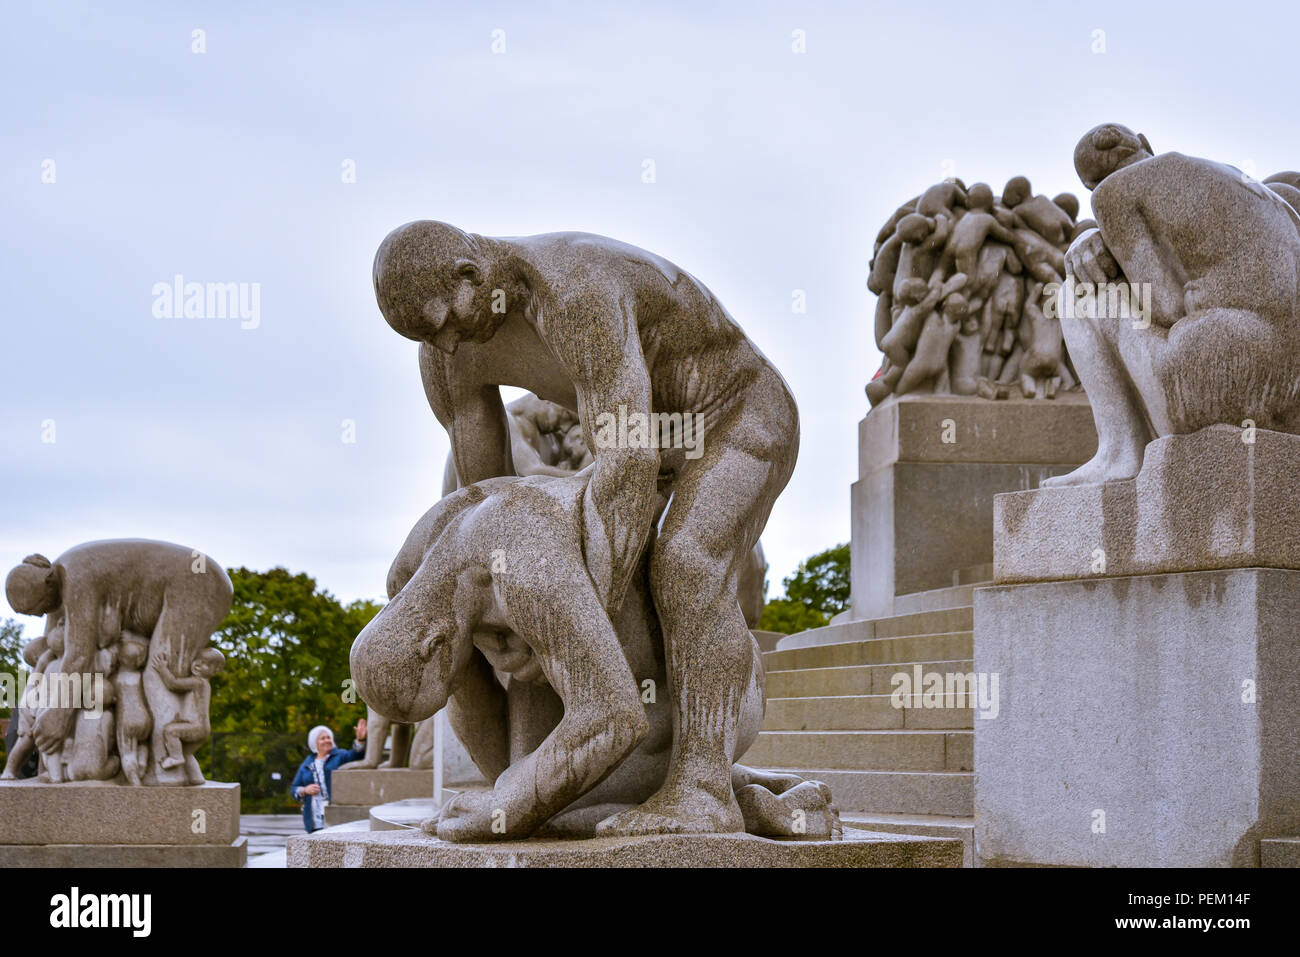 Oslo, Norway - Aug. 12, 2018: Sculptures by Gustav Vigeland (1869-1943), a  renowned Norwegian sculptor, Frogner Park, Oslo Stock Photo - Alamy